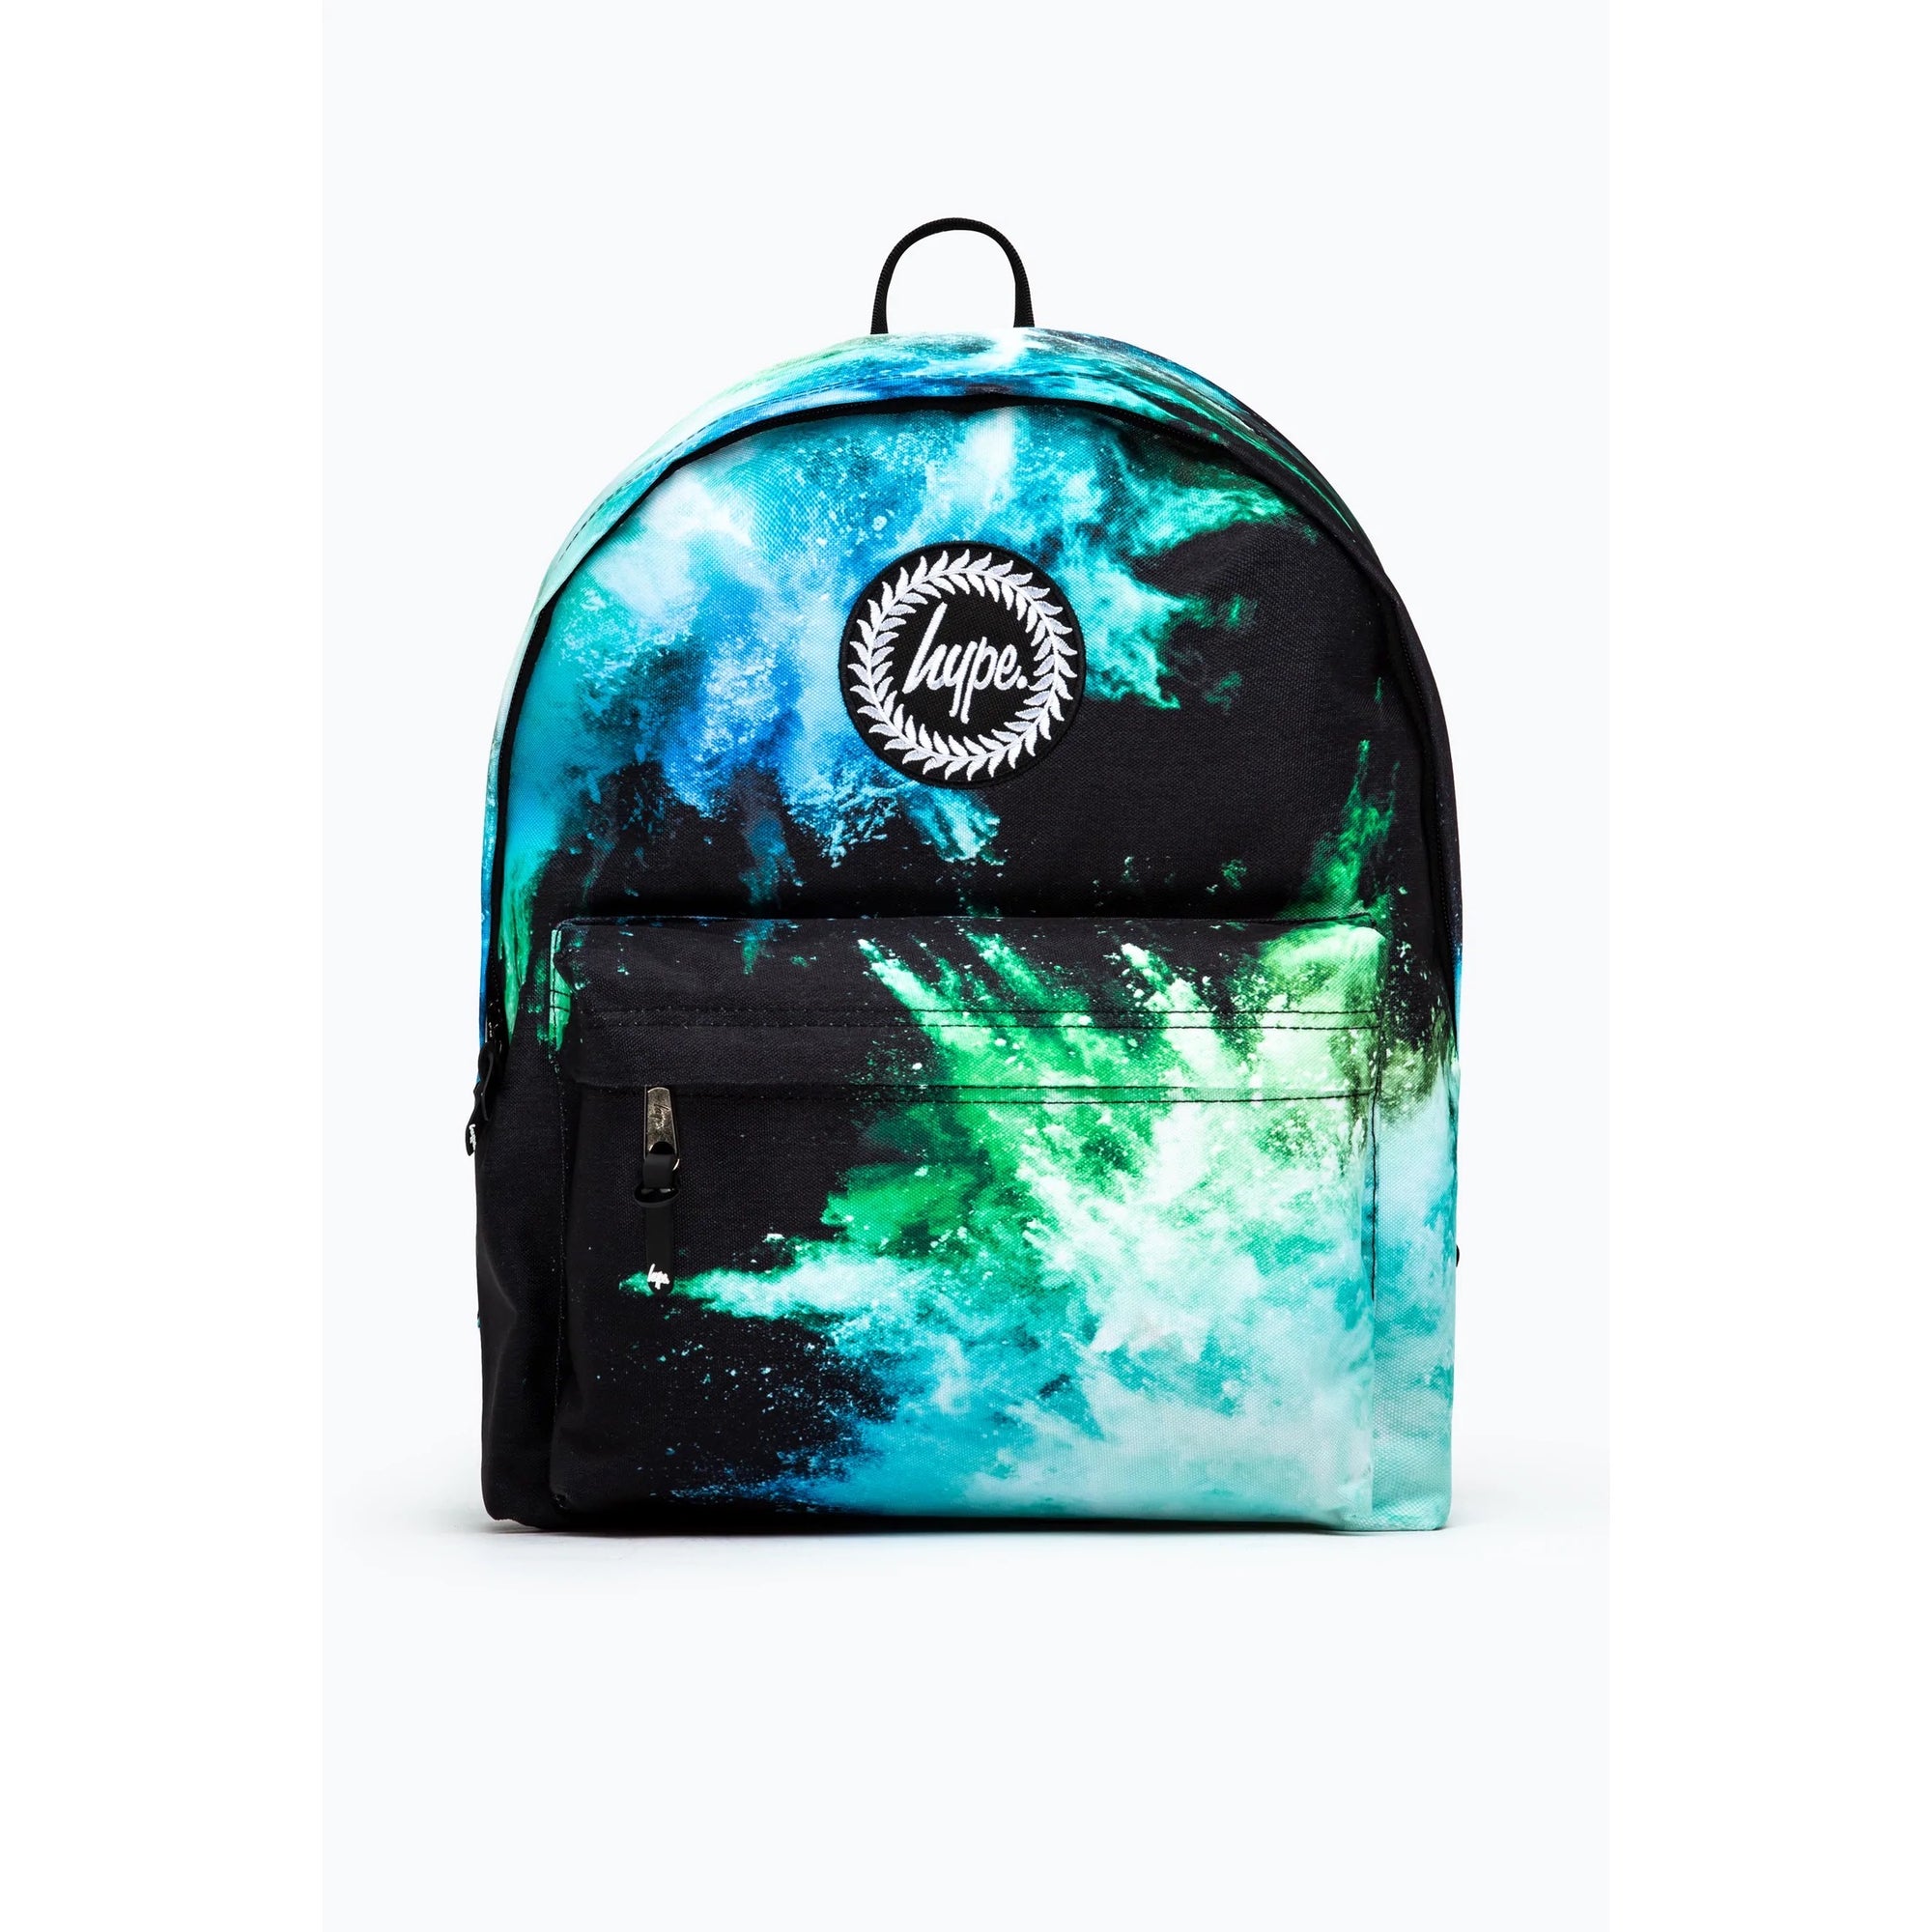 Hype Blue Green Chalk Dust Backpack Twlg726 Accessories ONE SIZE / Multi